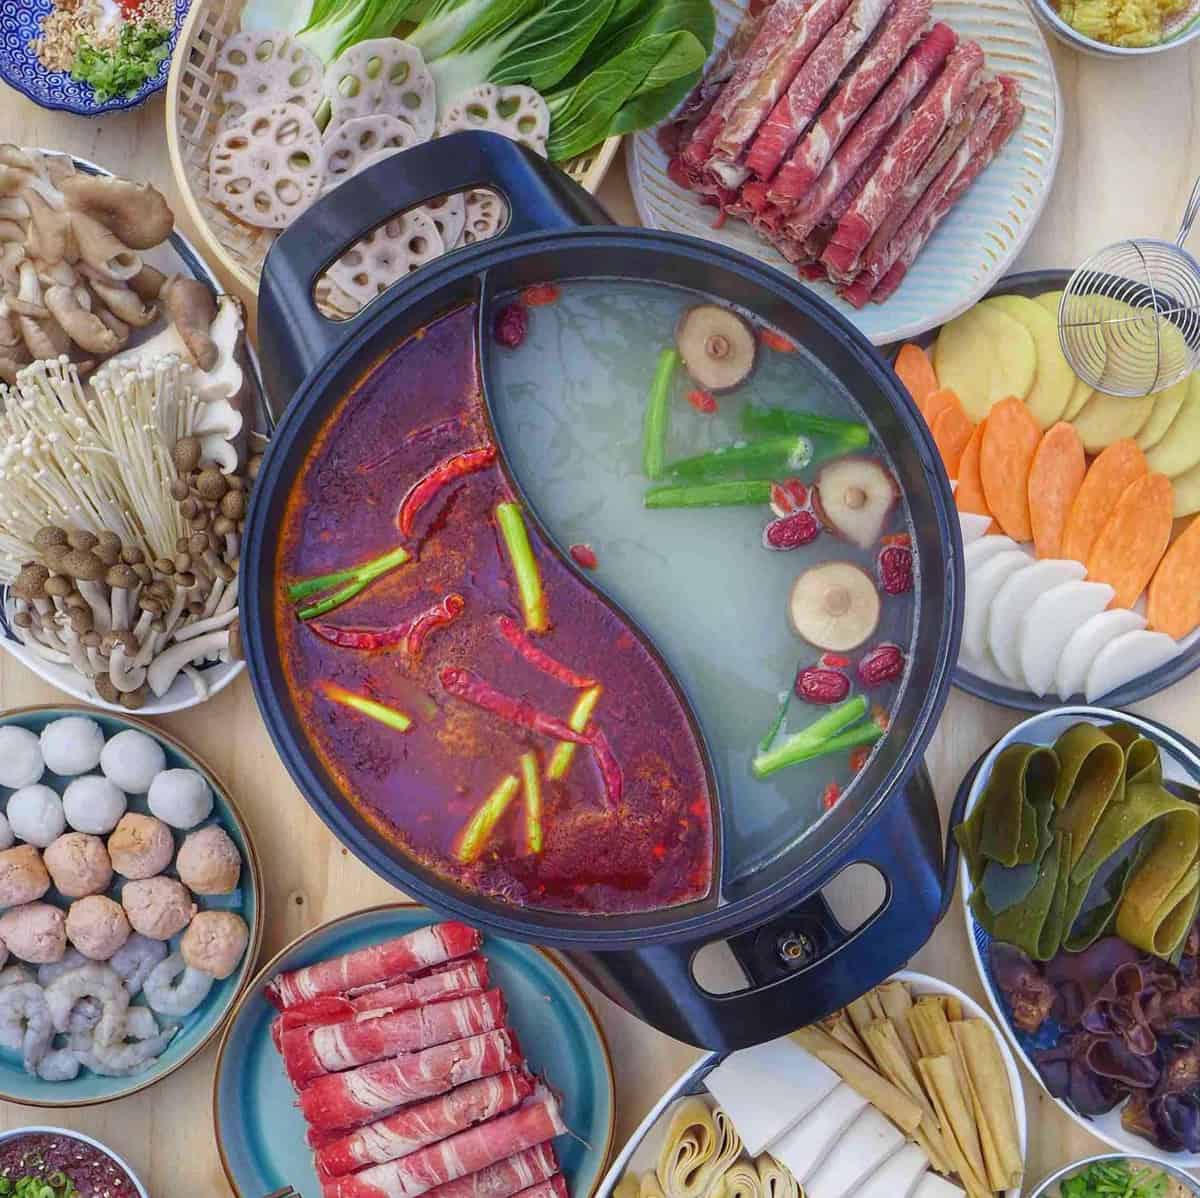 Chinese Hot Pot, A Complete Guide - Red House Spice